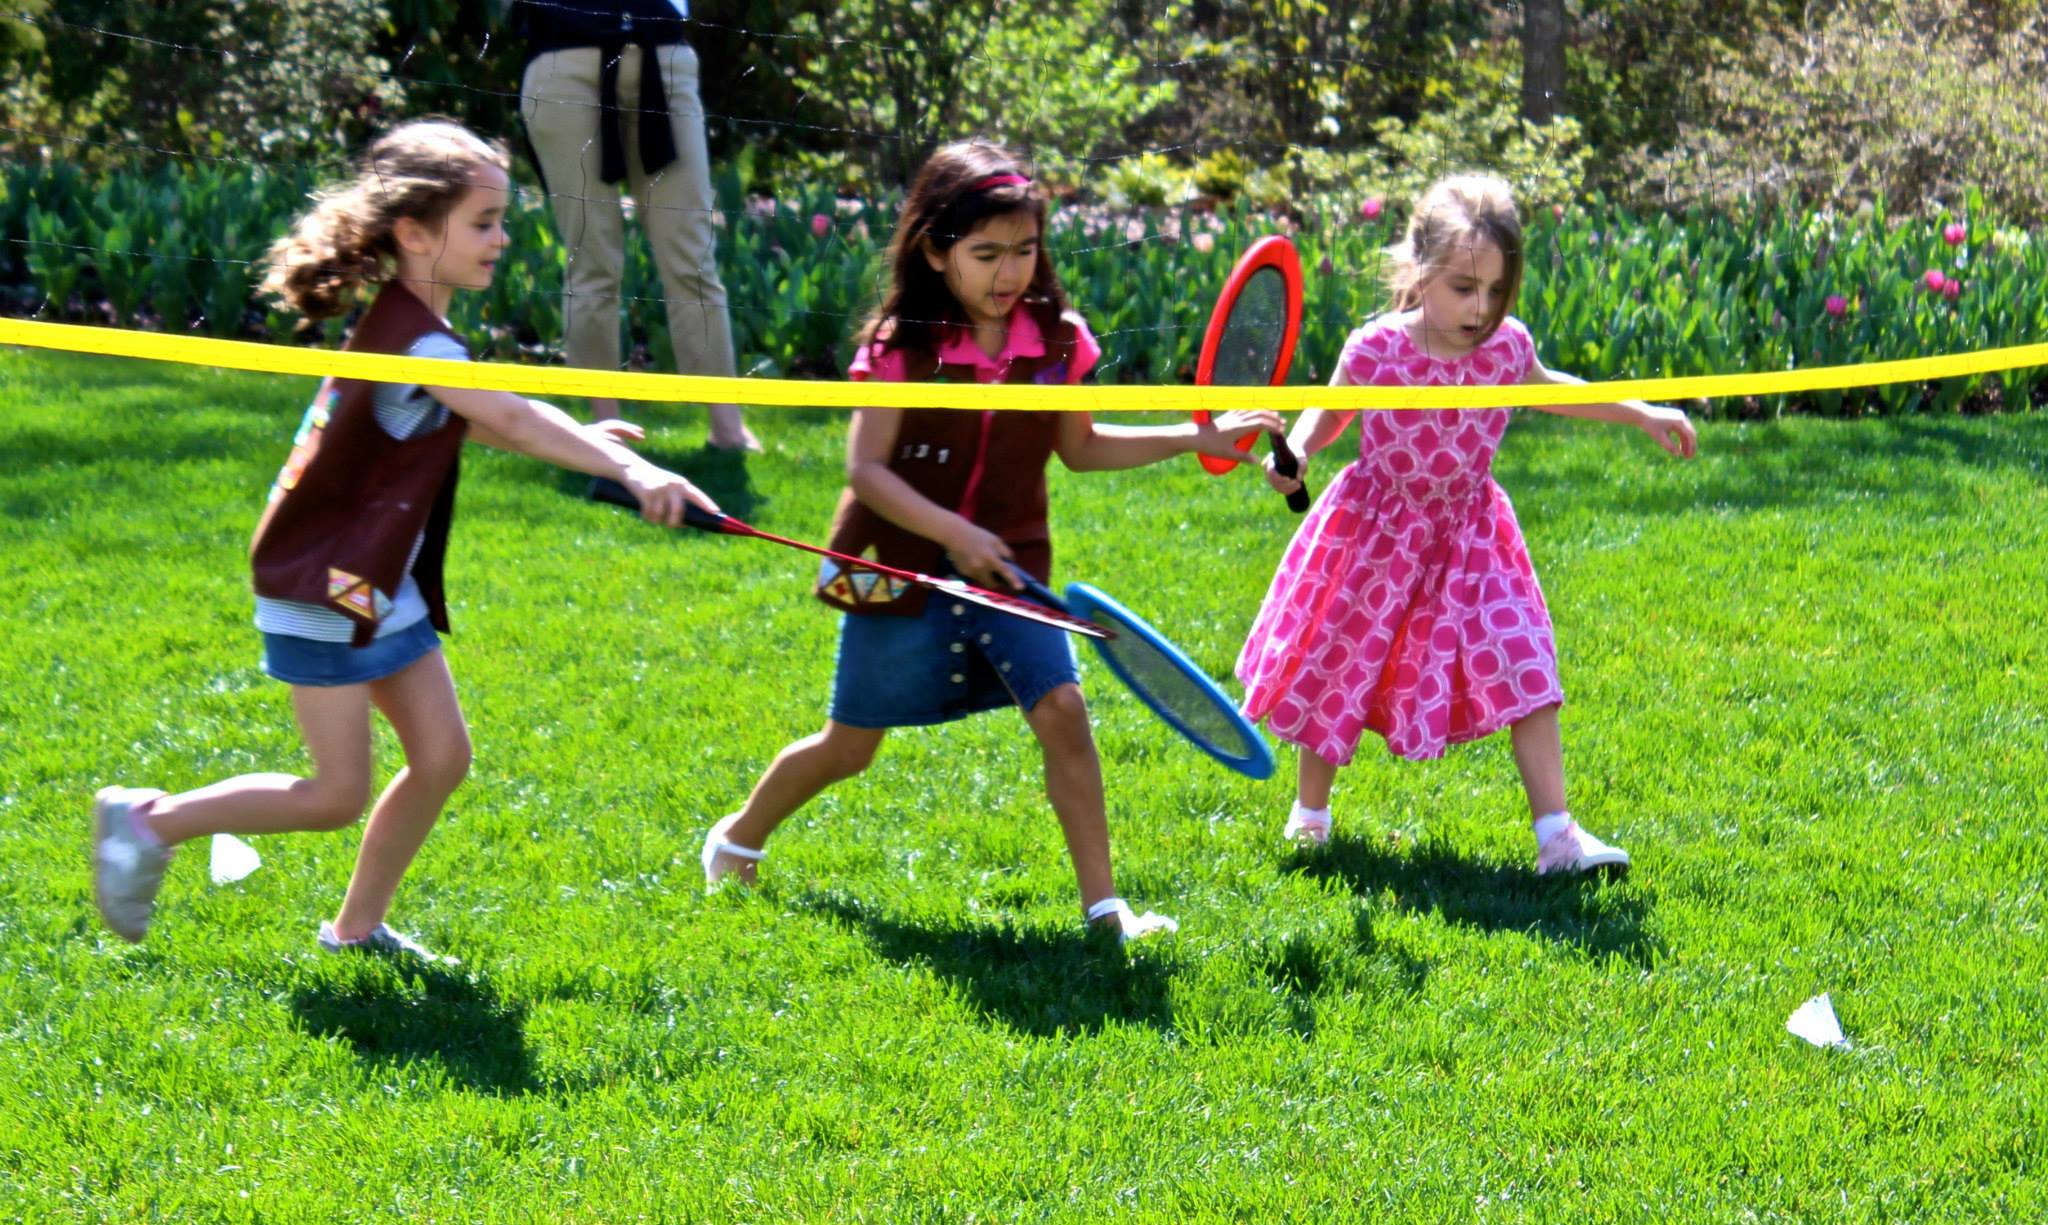 Girl Scouts playing badminton